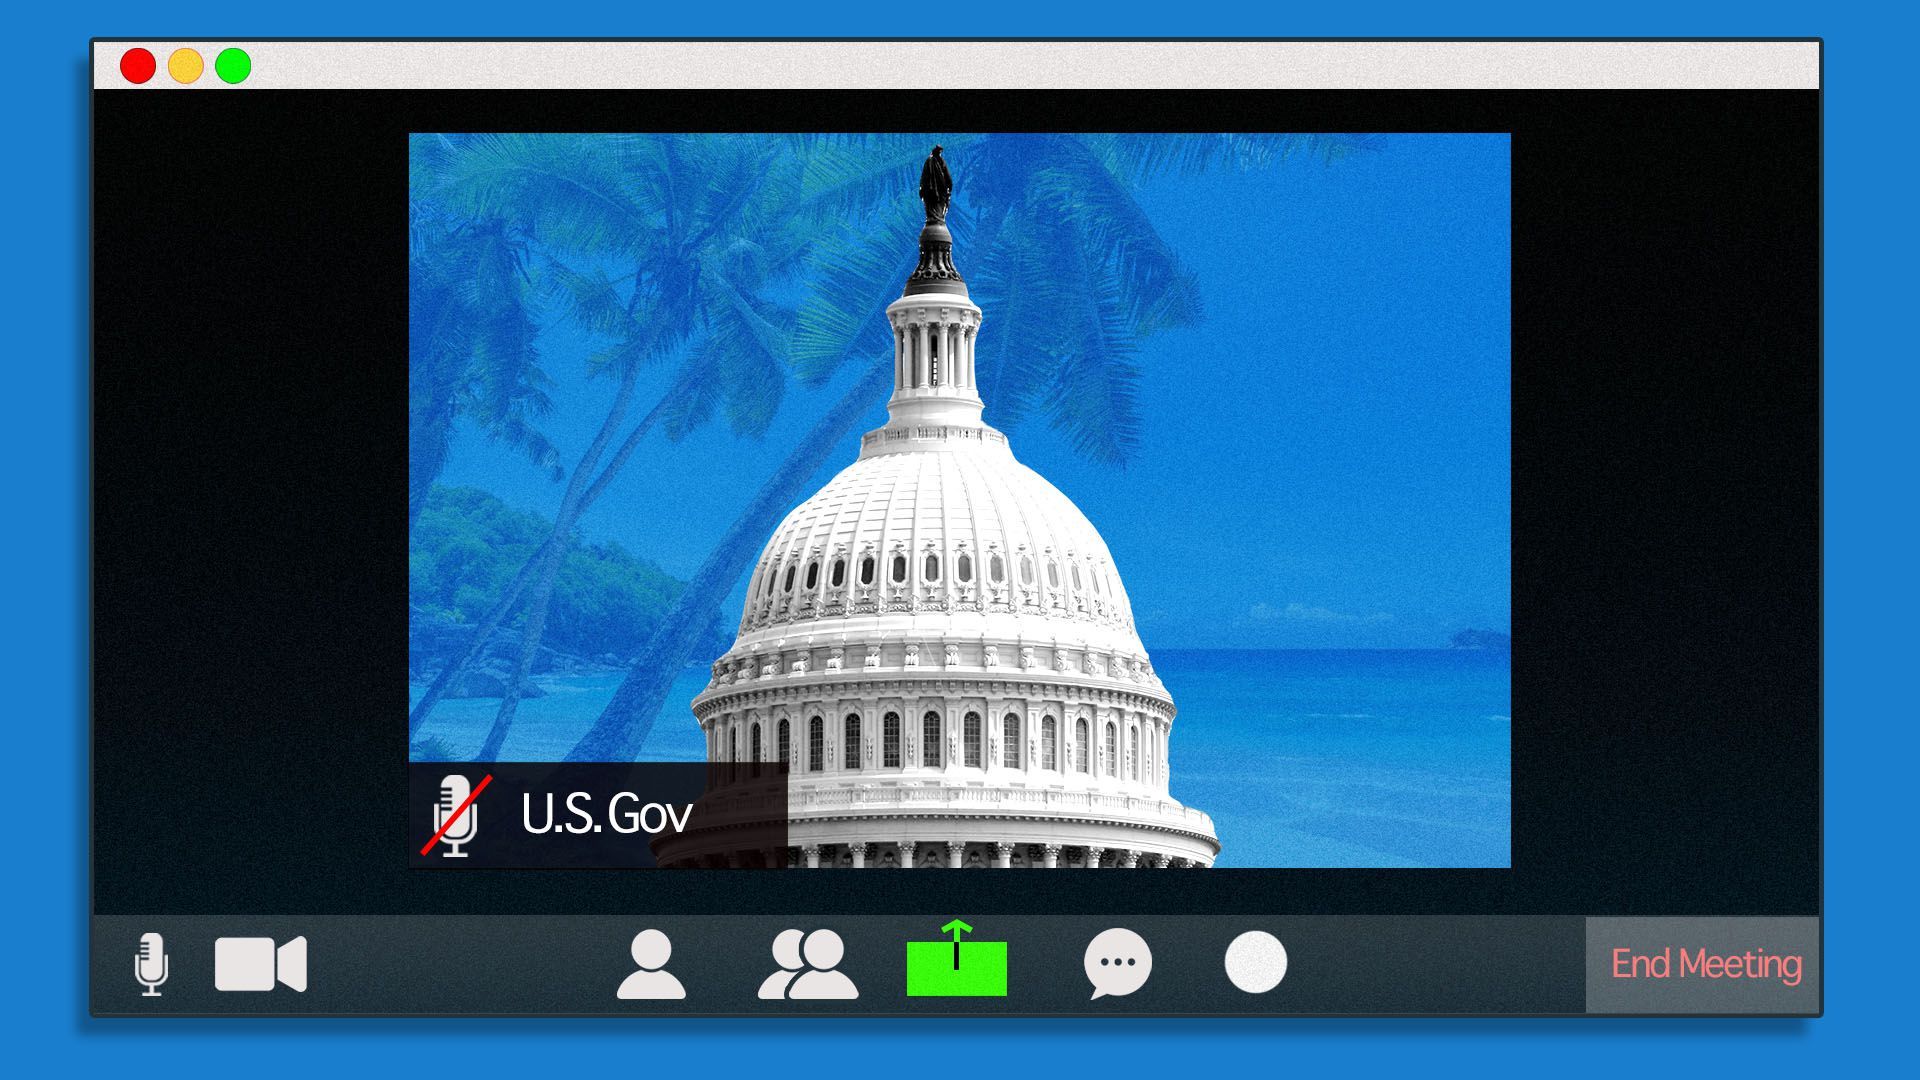 Illustration of the U.S. Capitol Building on a zoom call